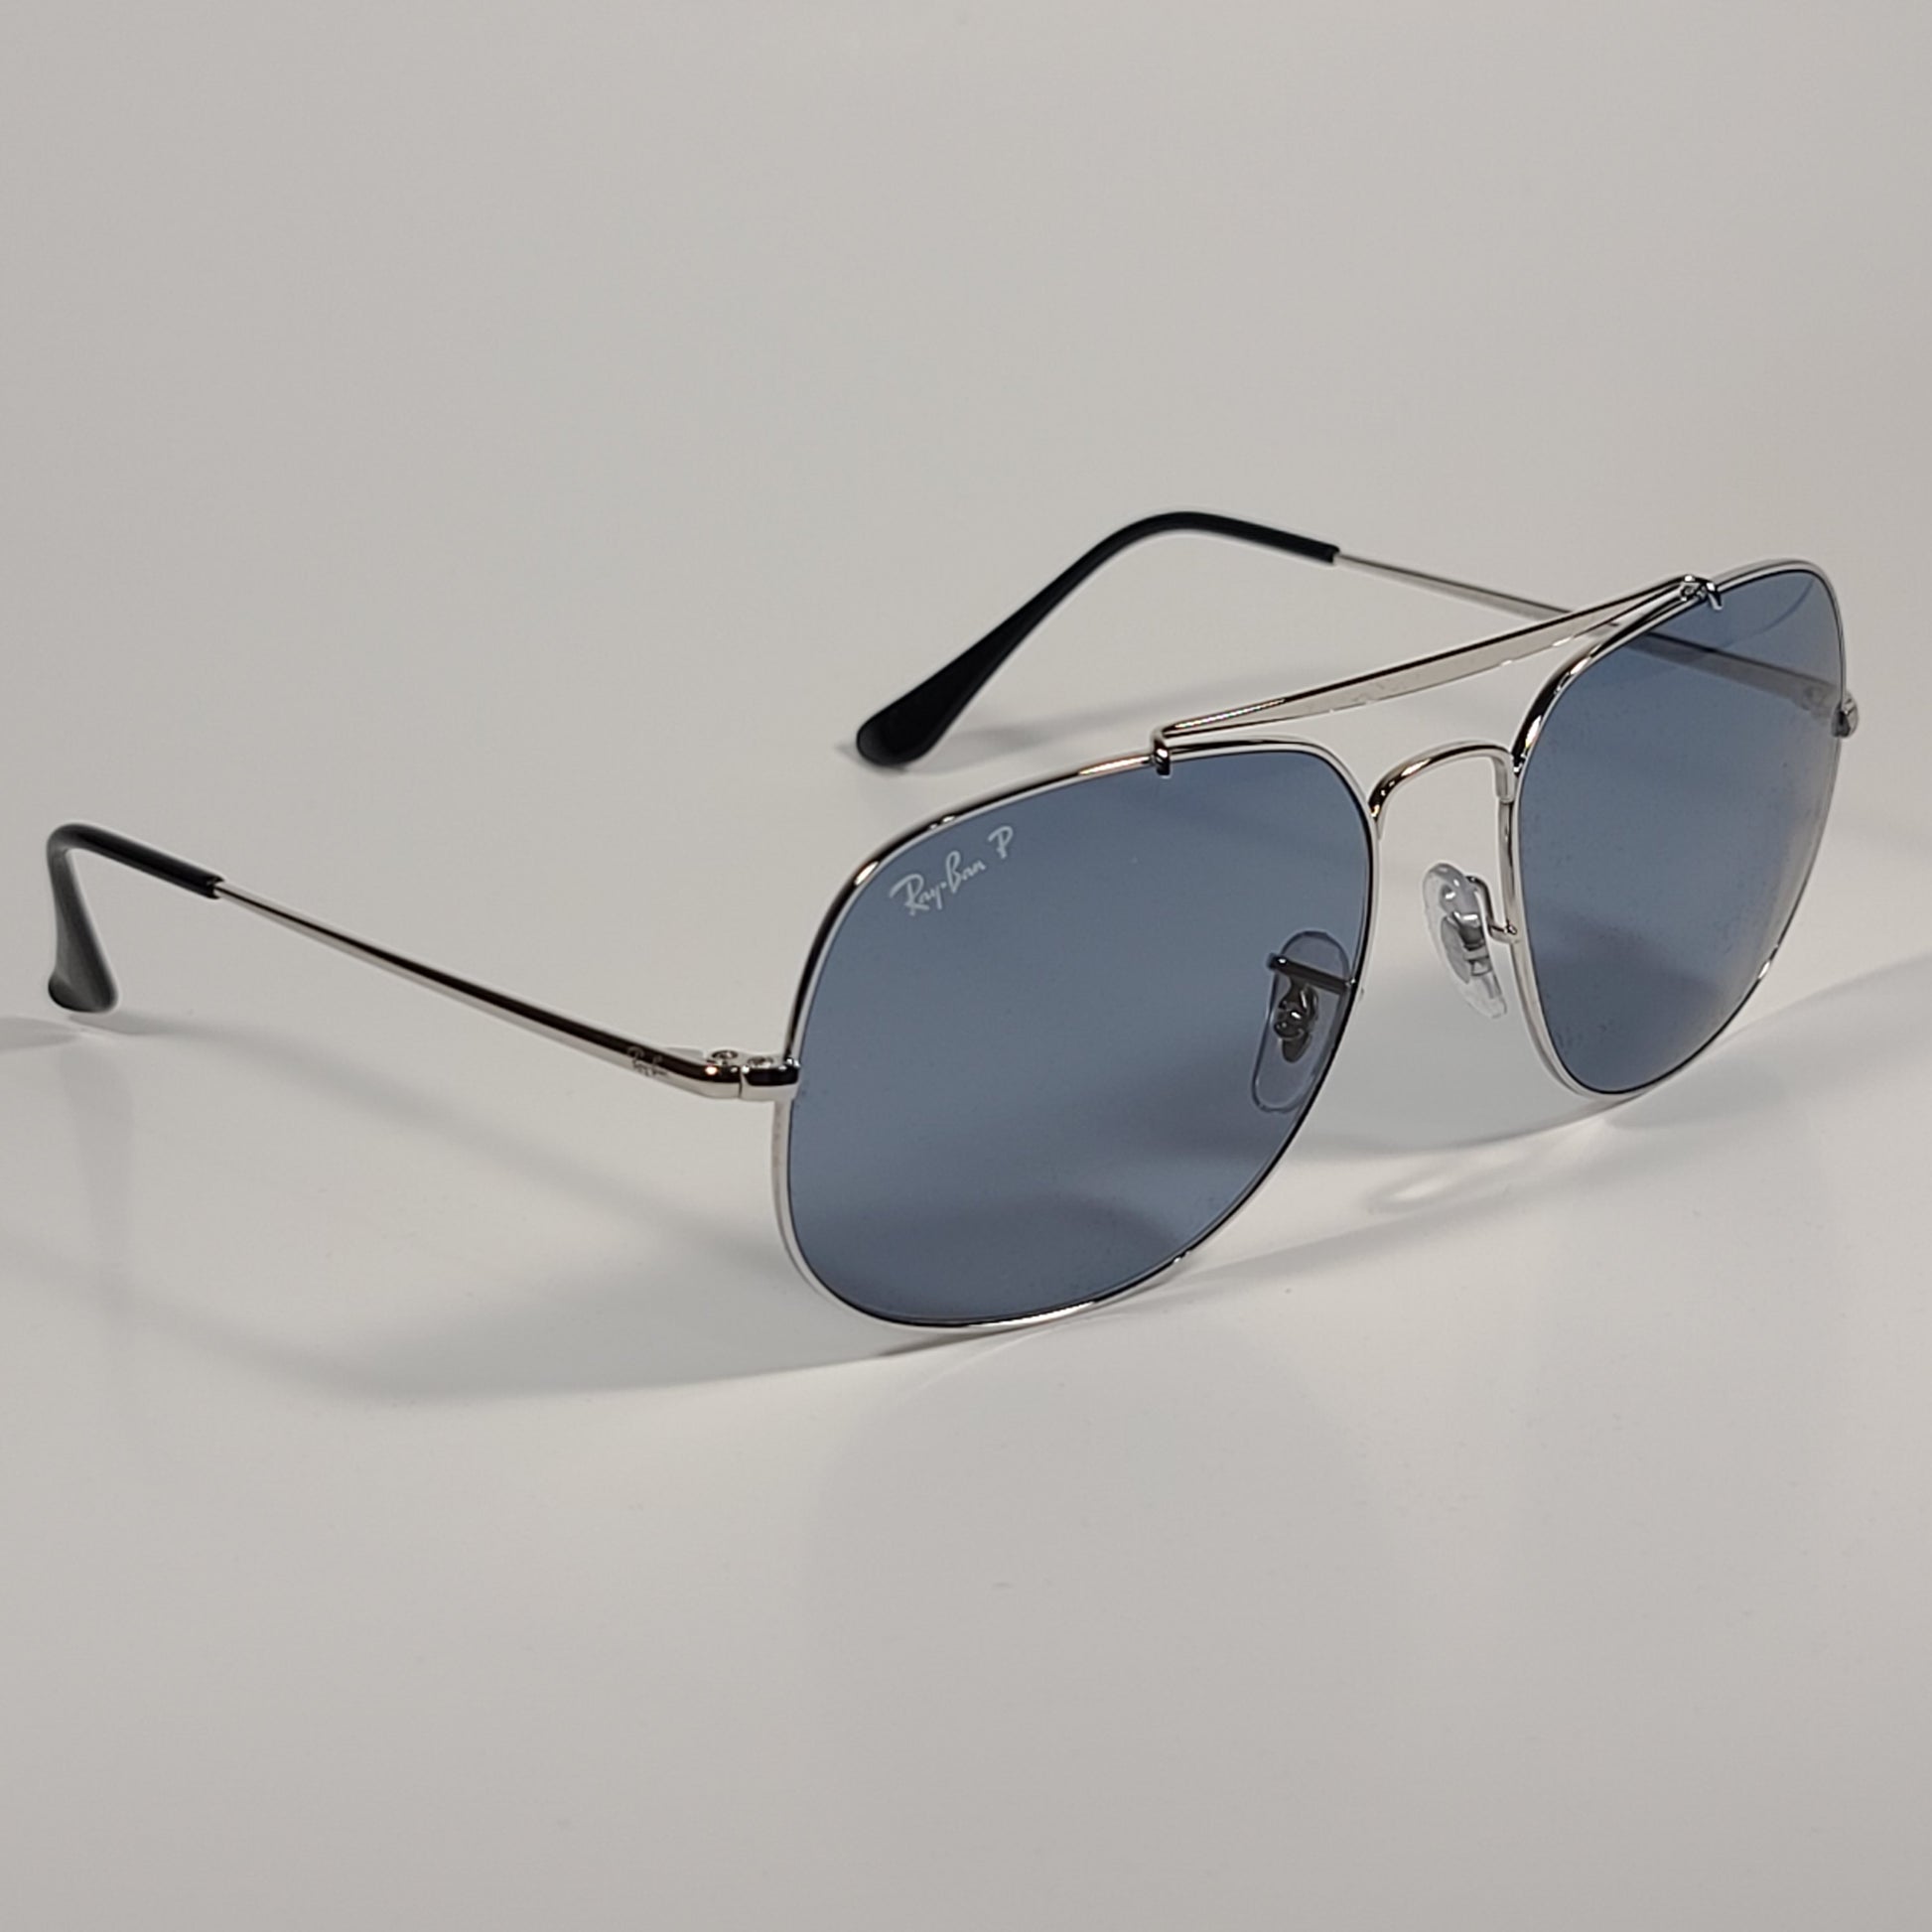 Ray-Ban The General Polarized Aviator Sunglasses Silver Frame Gray Lens RB3561 003/52 - Sunglasses